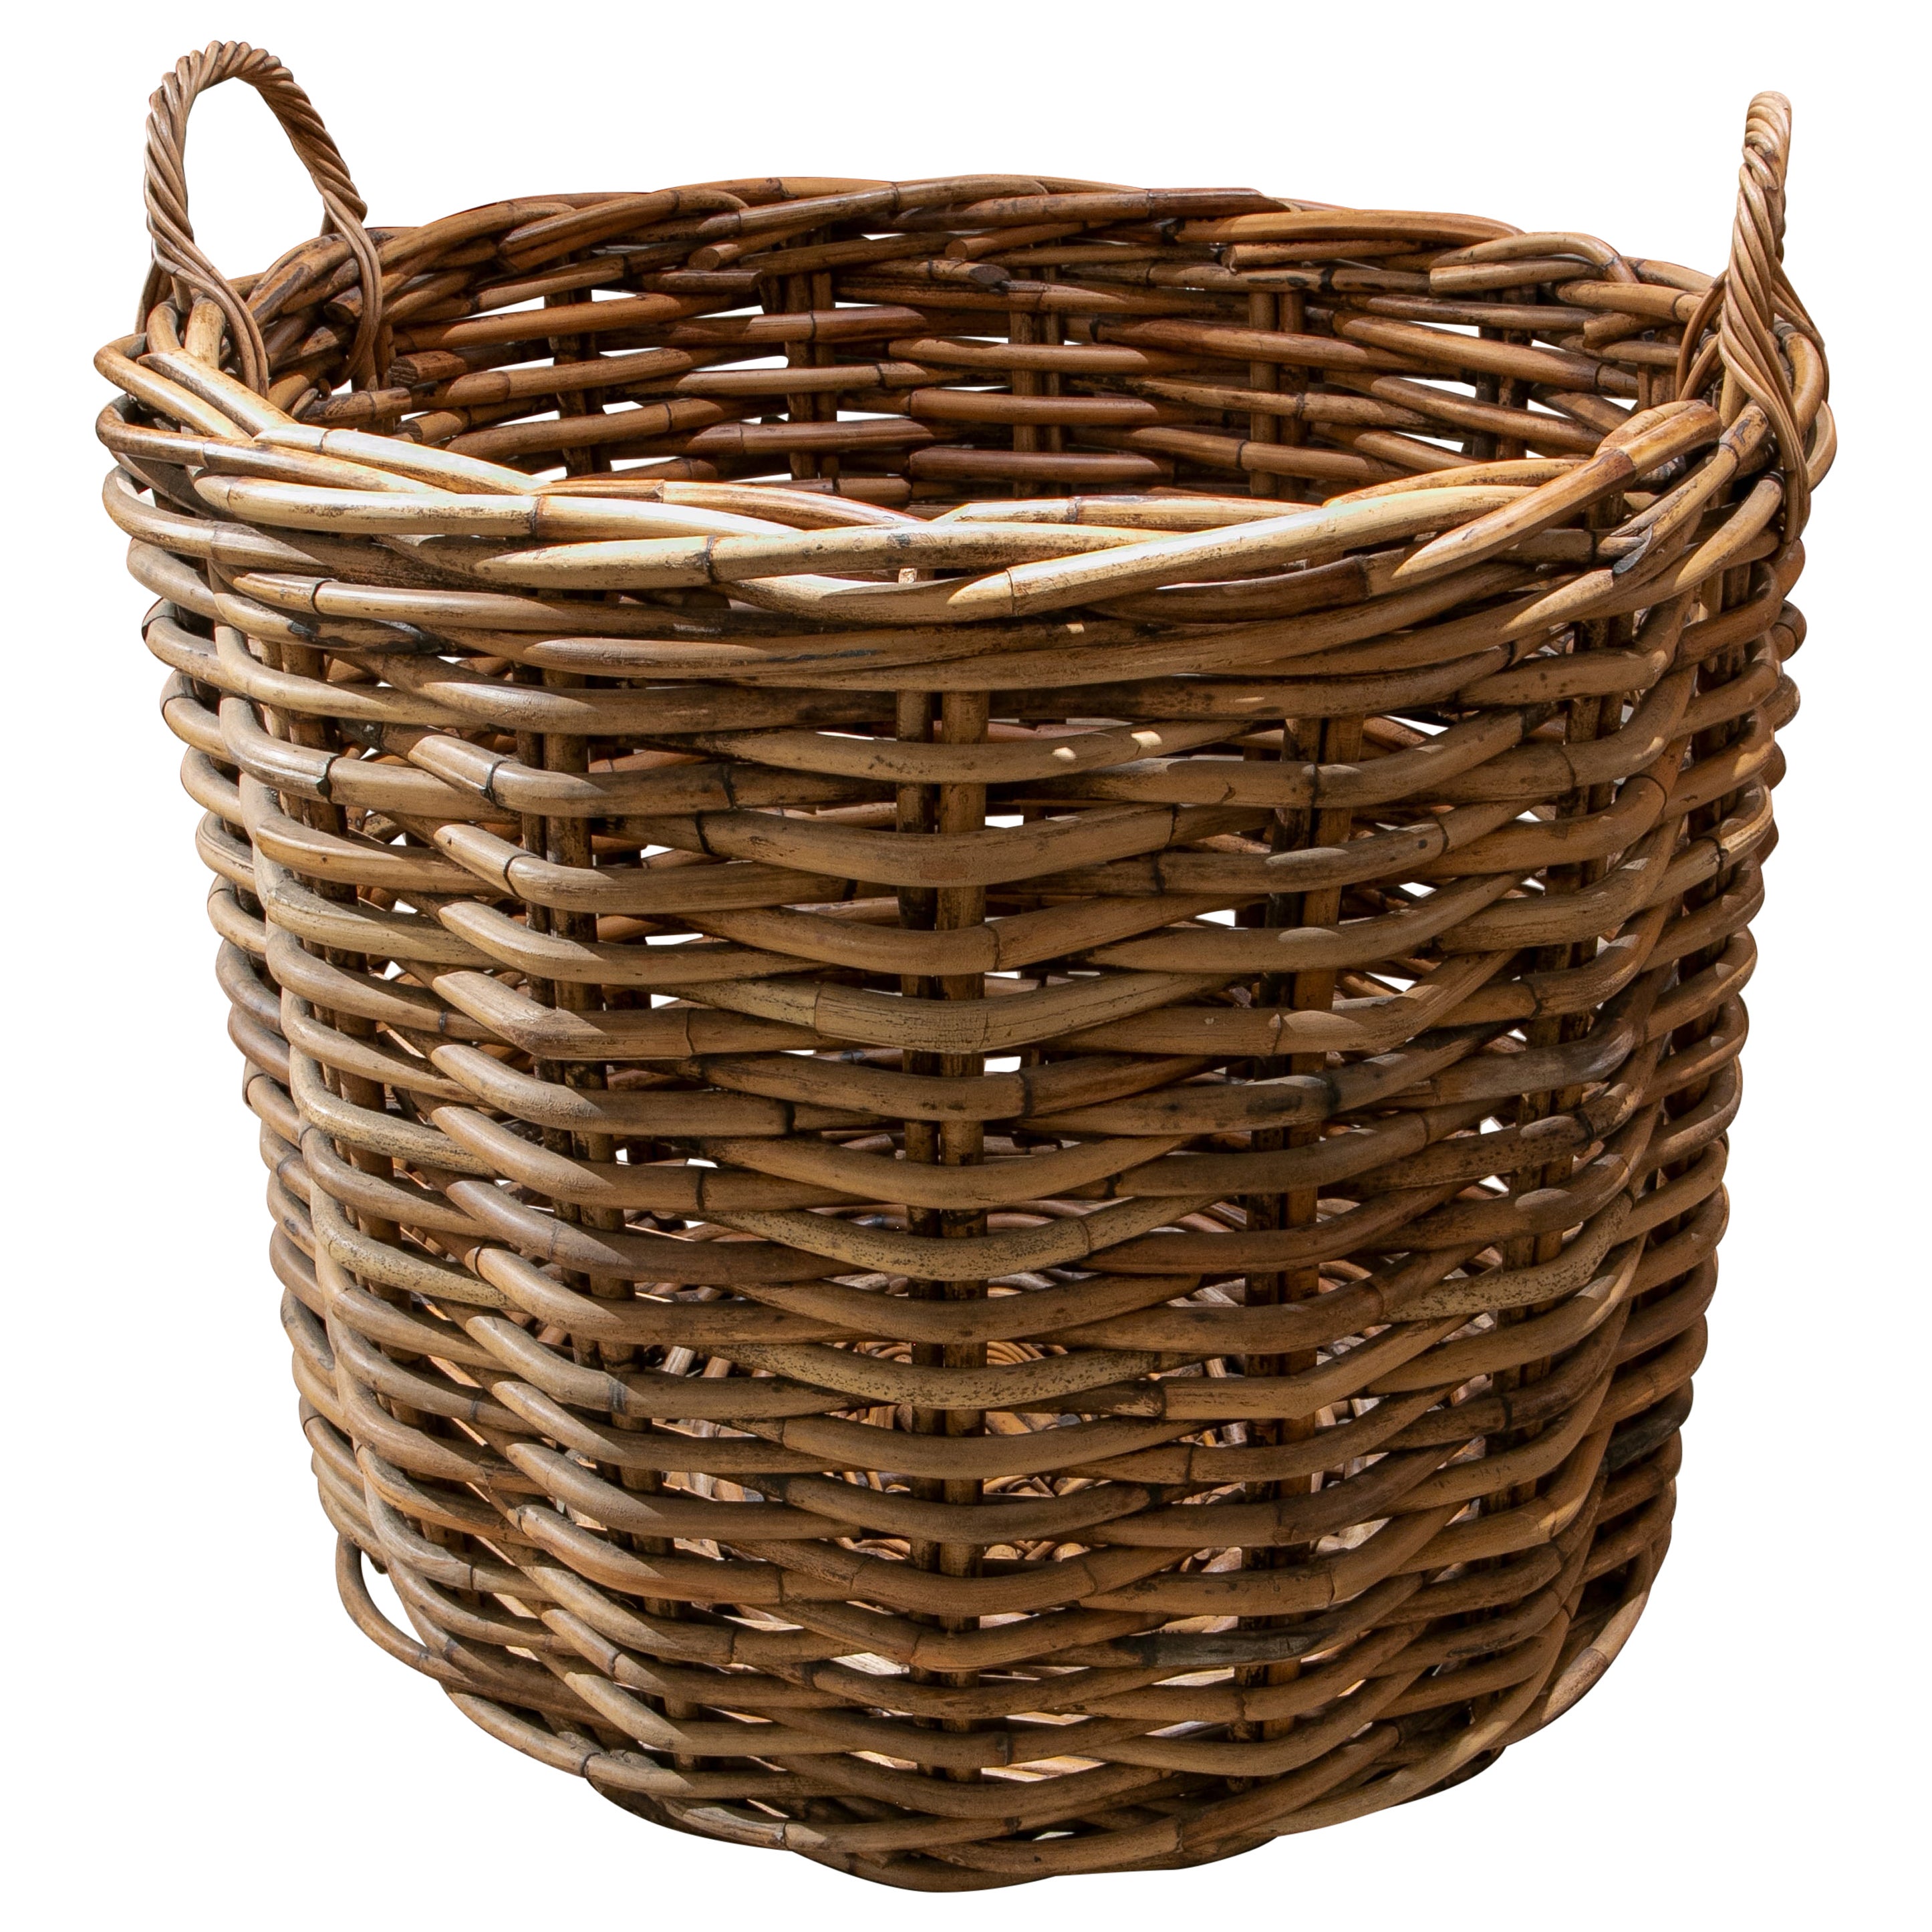 Handmade Large Bamboo Basket with Handles for Plants or Storage